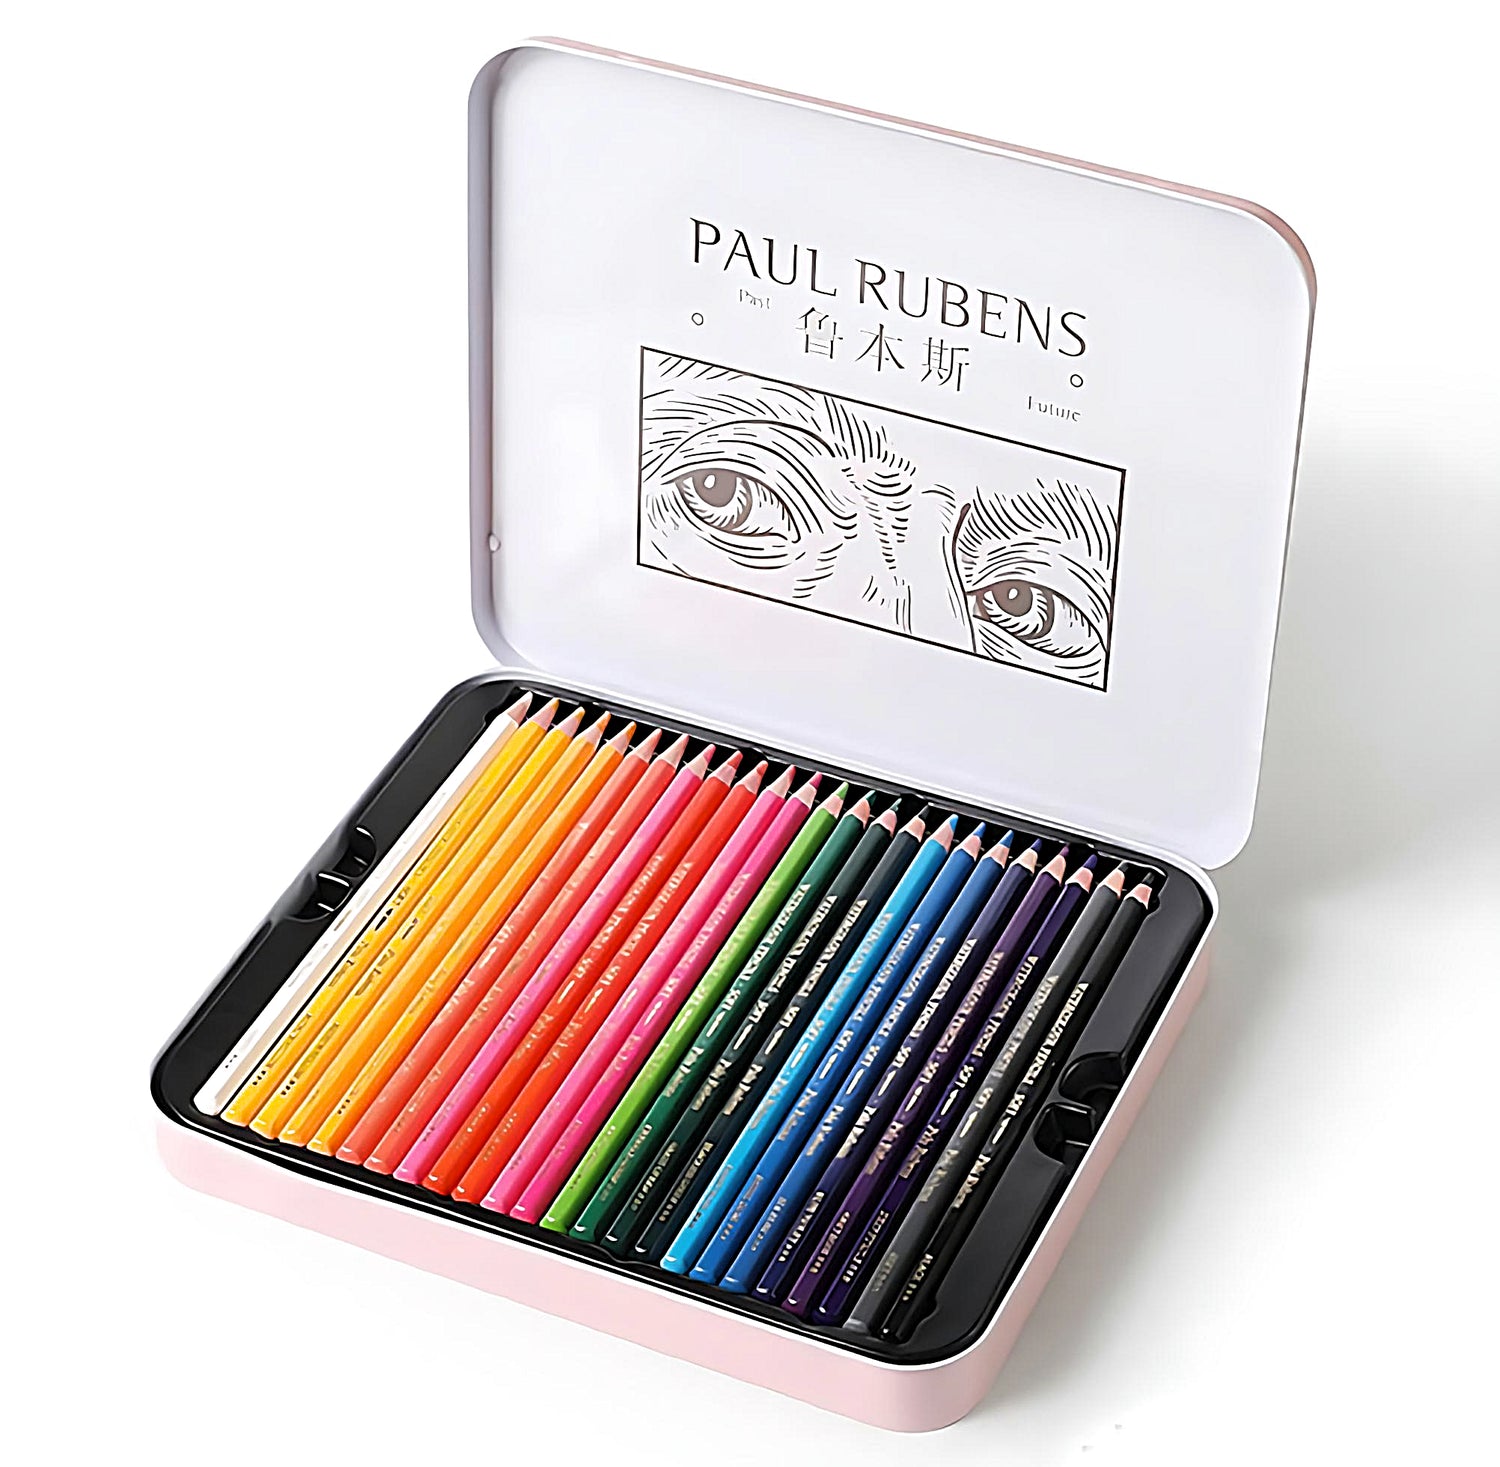 a set of 48 Paul Rubens watercolor pencils in a pink tin box